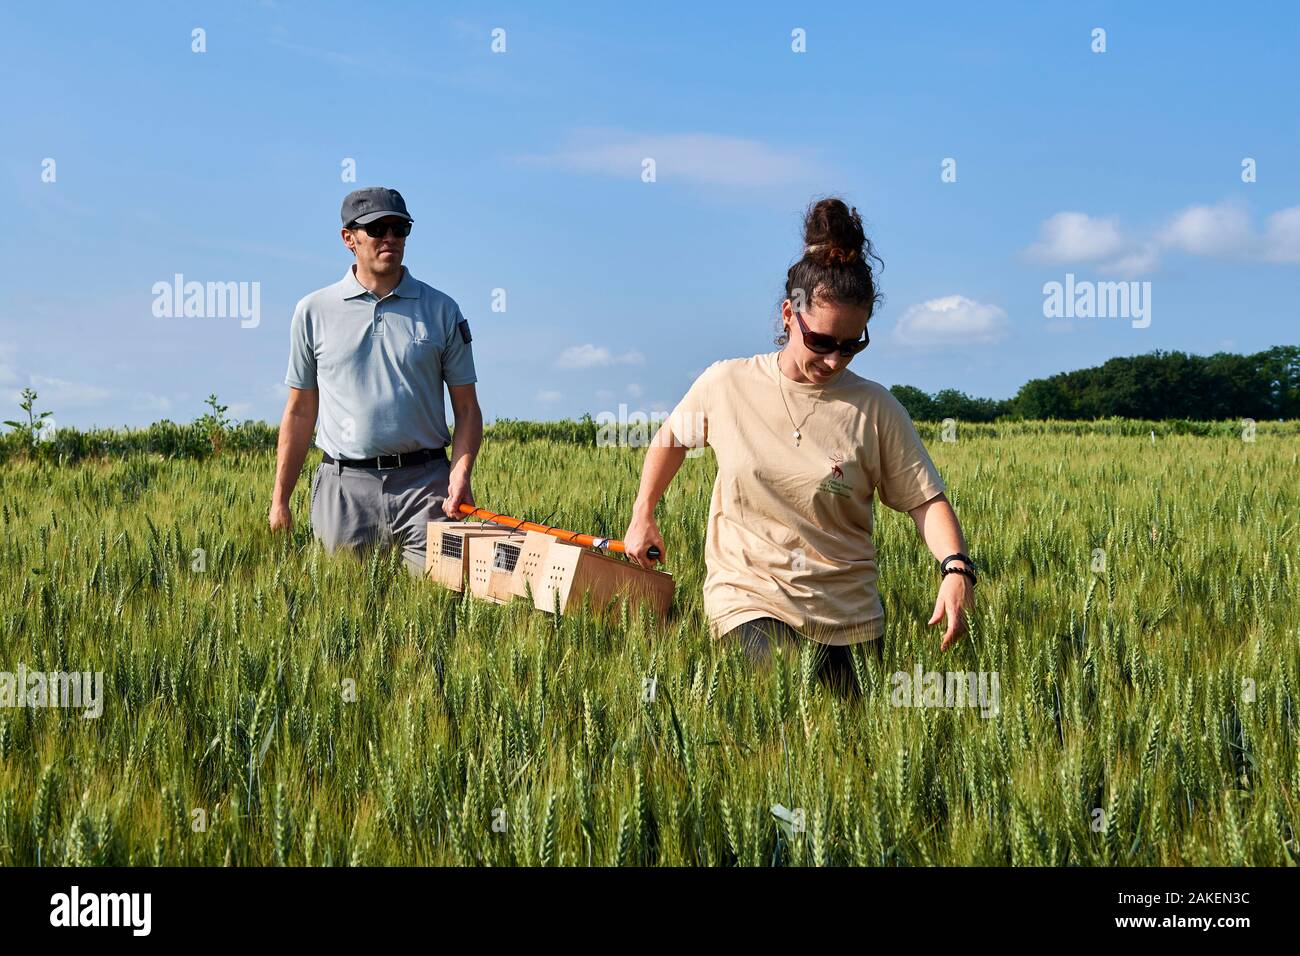 Scientists from the French Wildlife Department (ONCFS) with cages of Common hamsters (Cricetus cricetus) in a wheat field for release, Geispolsheim, Alsace, France, June 2018 Stock Photo